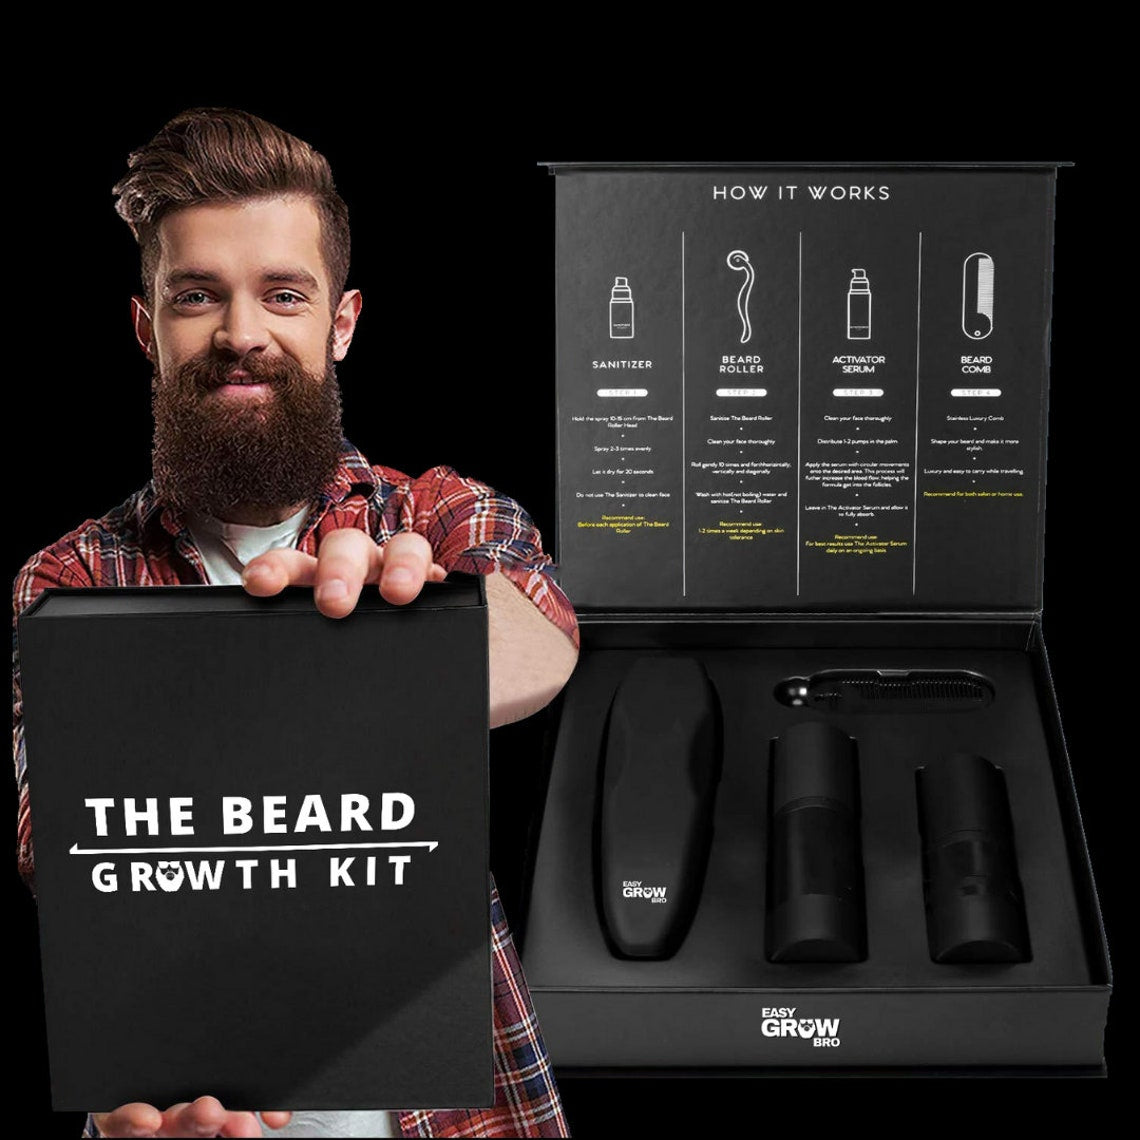 Which Beard Growth Kit Is Best?